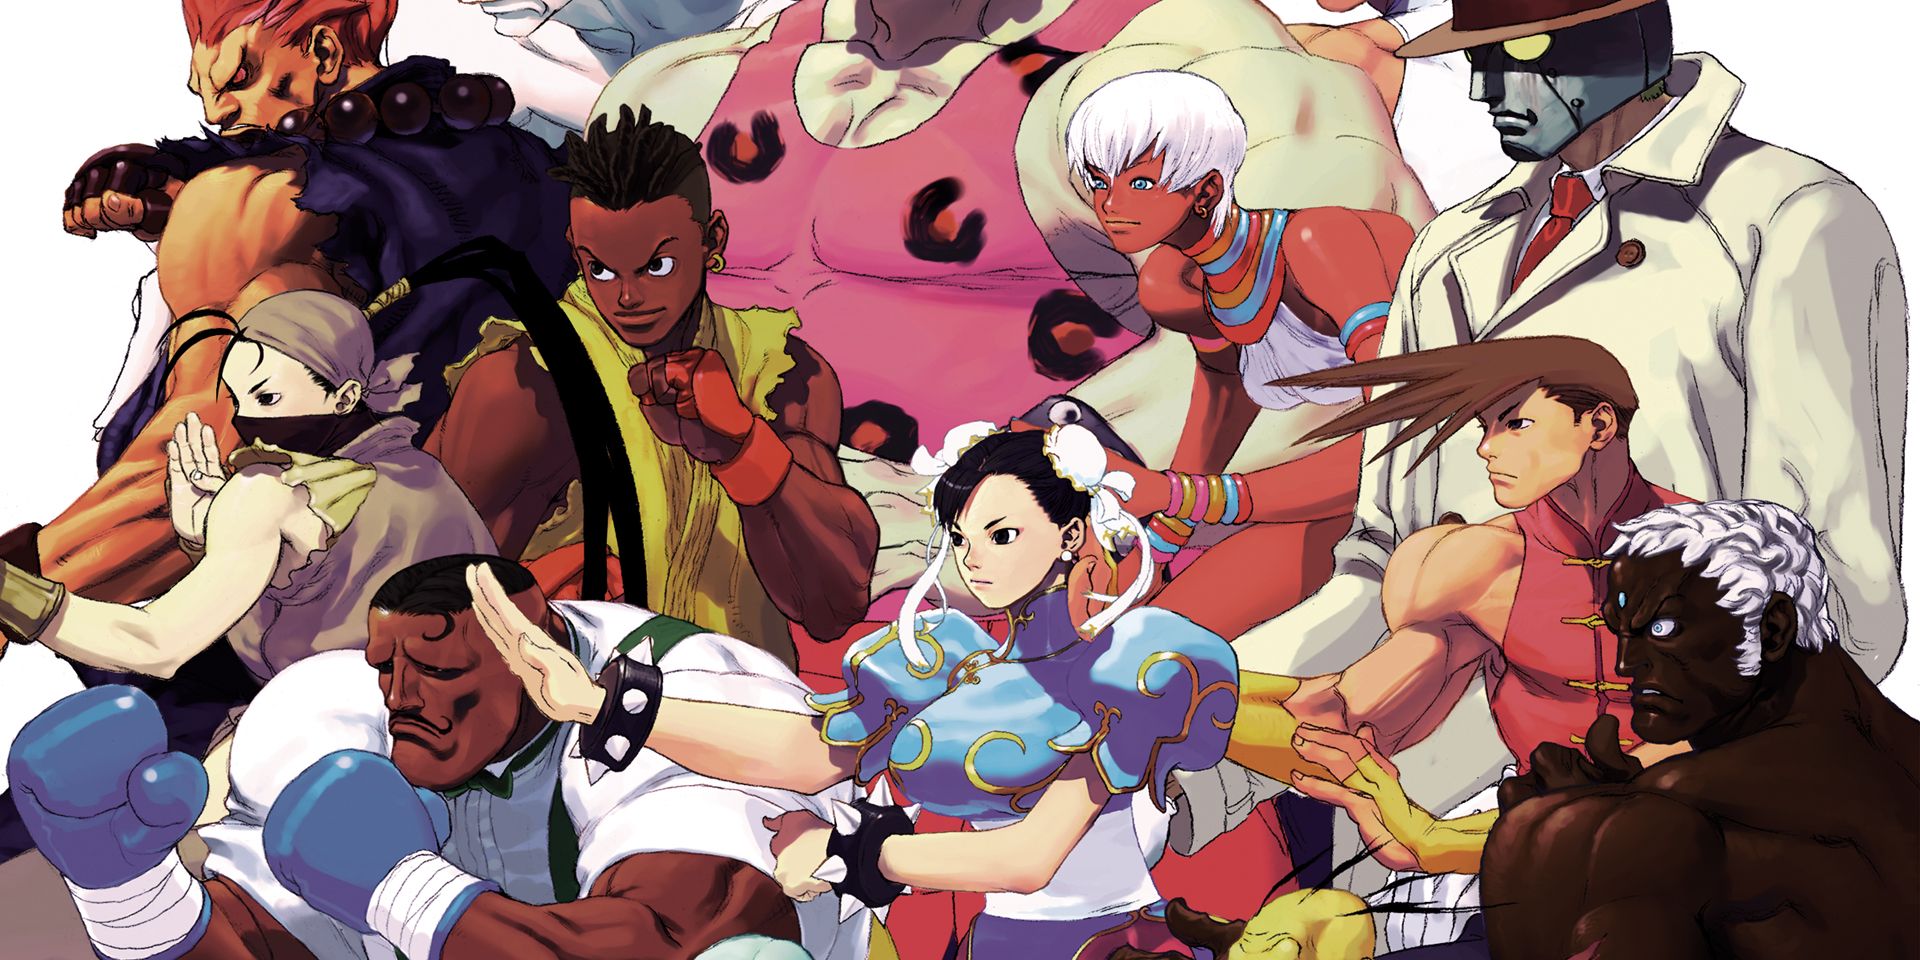 The cast of fighters in Street Fighter III 3rd Strike